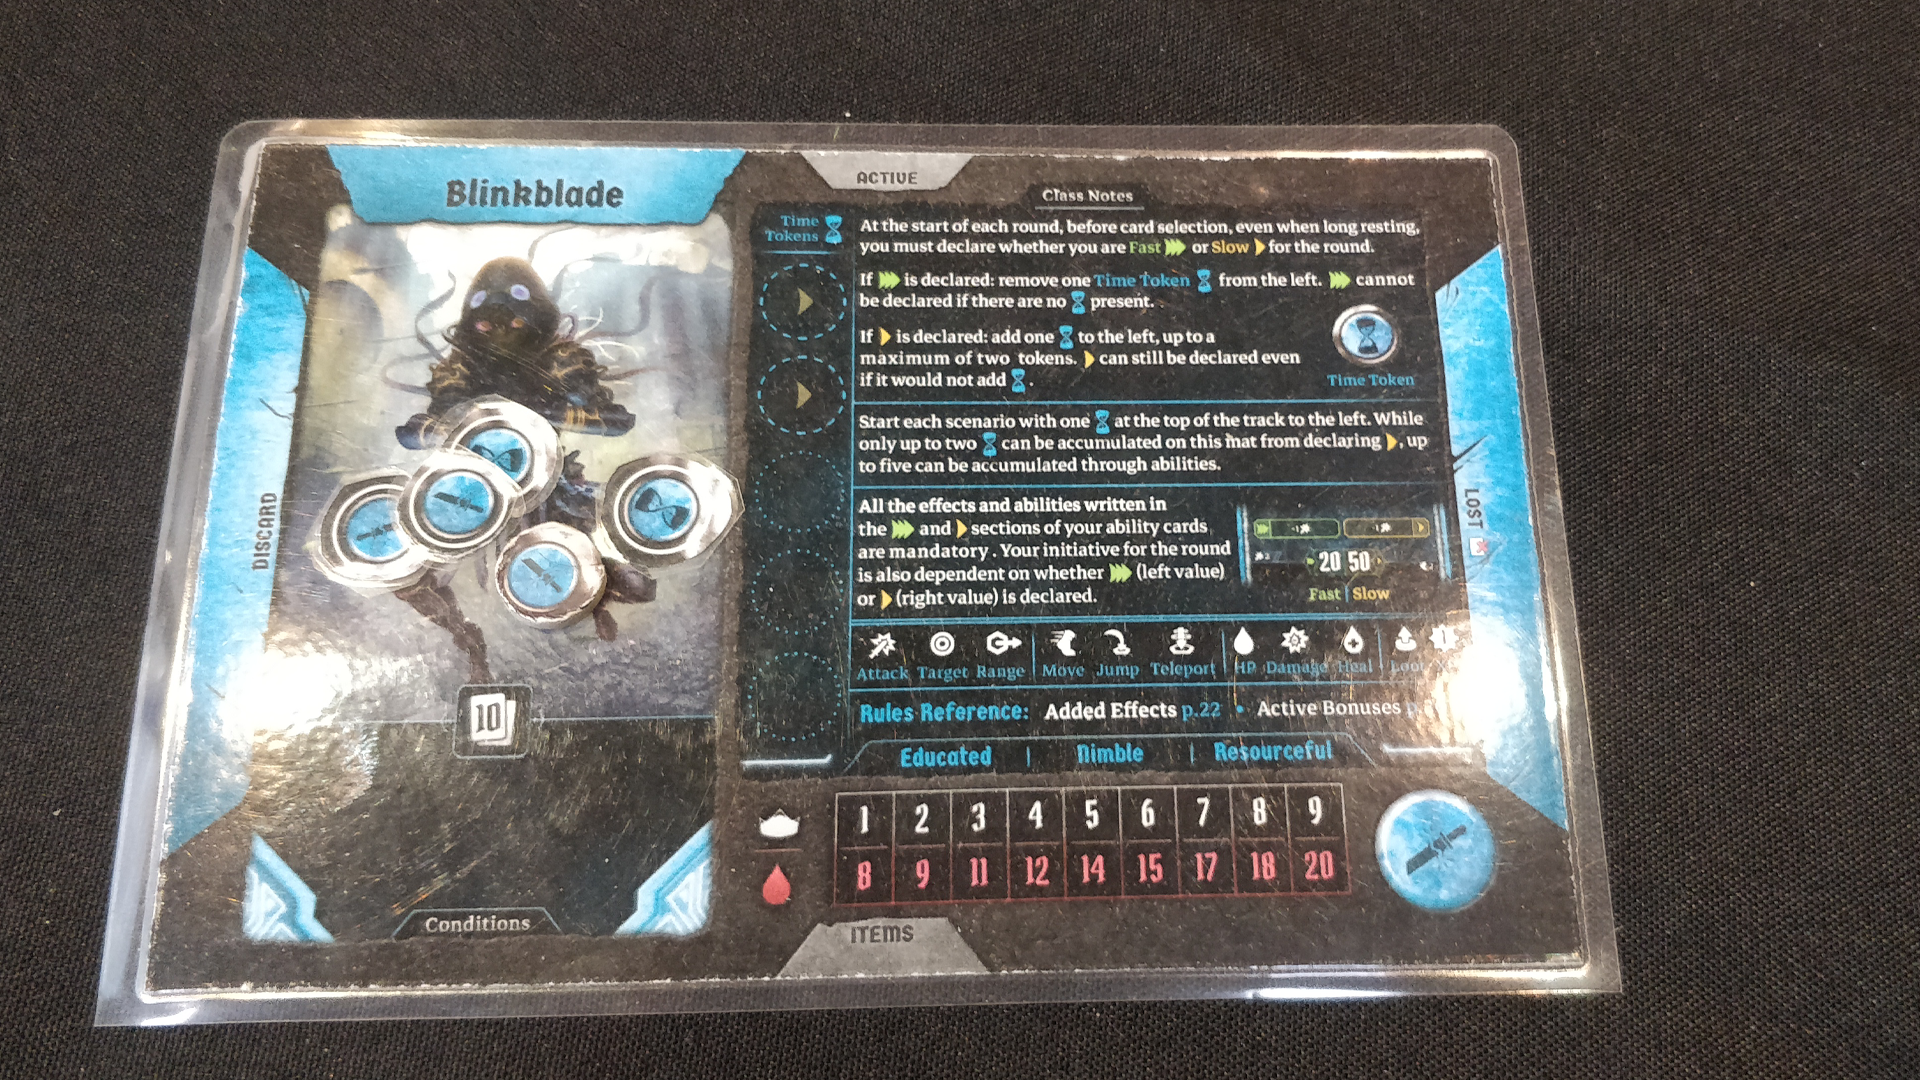 An image of the character card for Blink Blade in Frosthaven